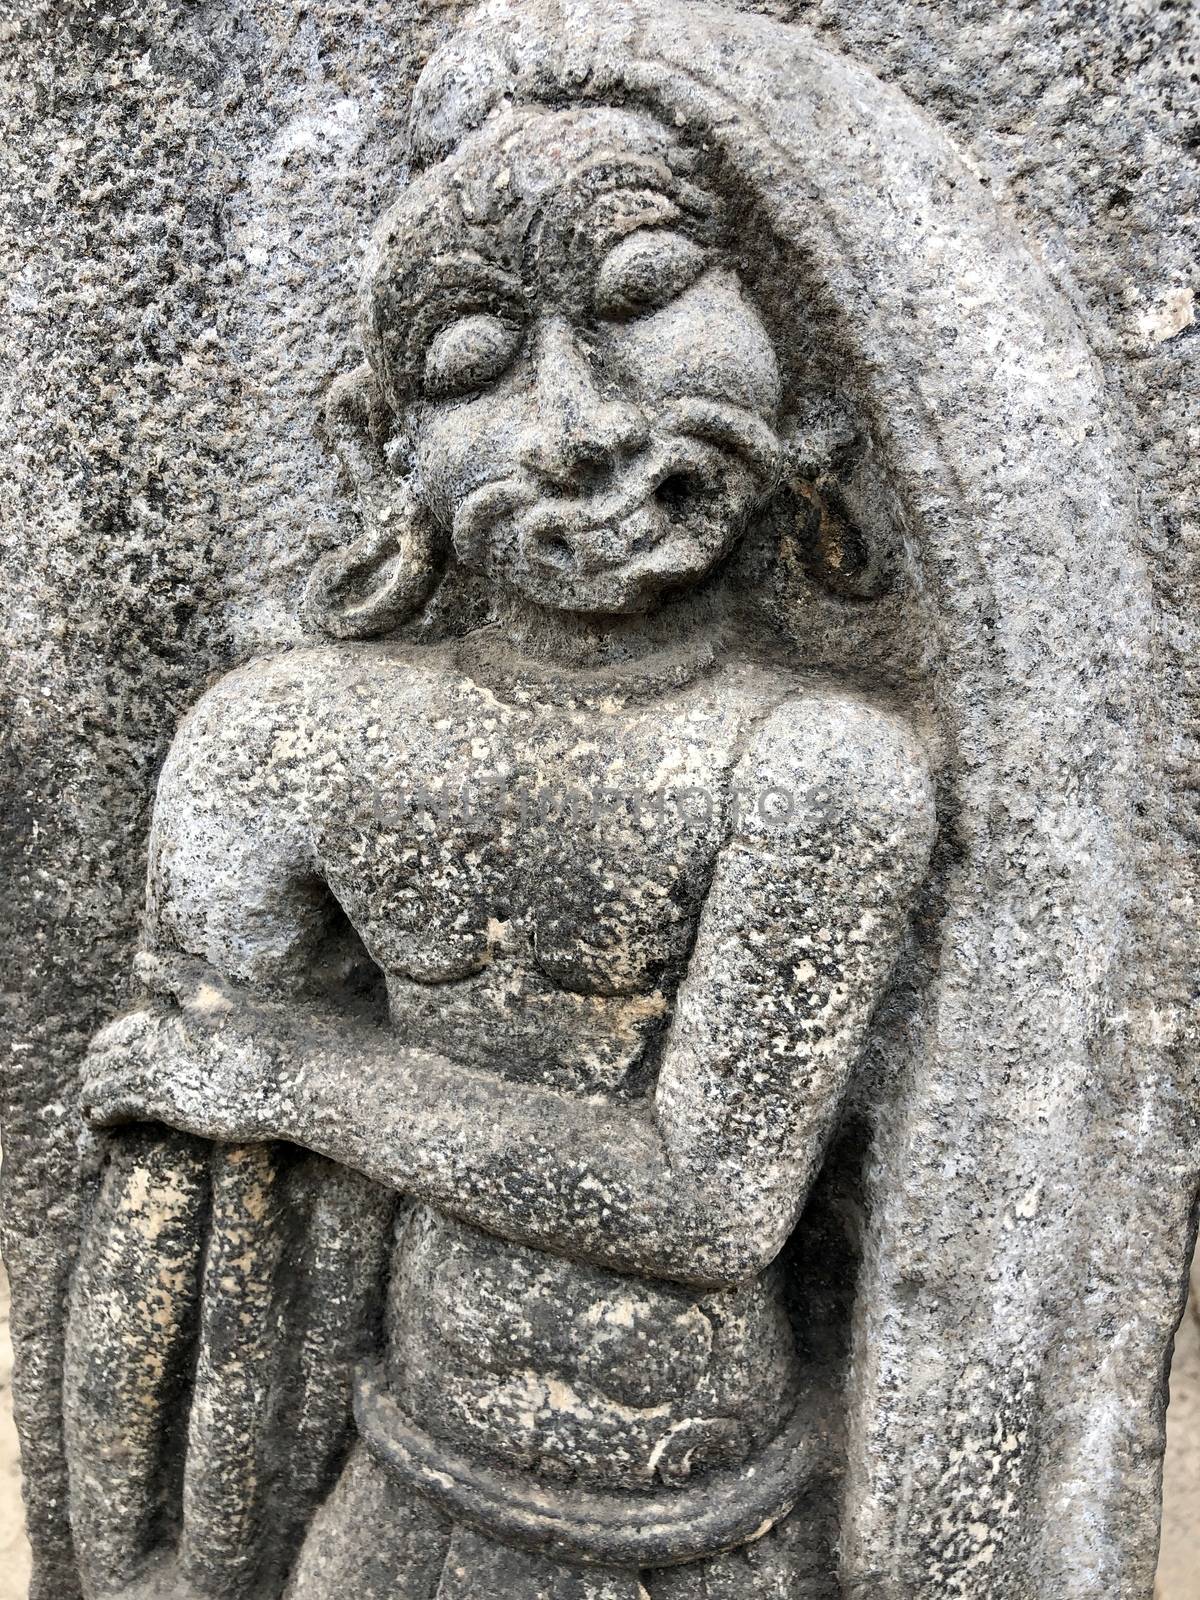 Bas relief sculpture of an aged man carved in the walls of Shiva temple at Tamil nadu by prabhakaran851